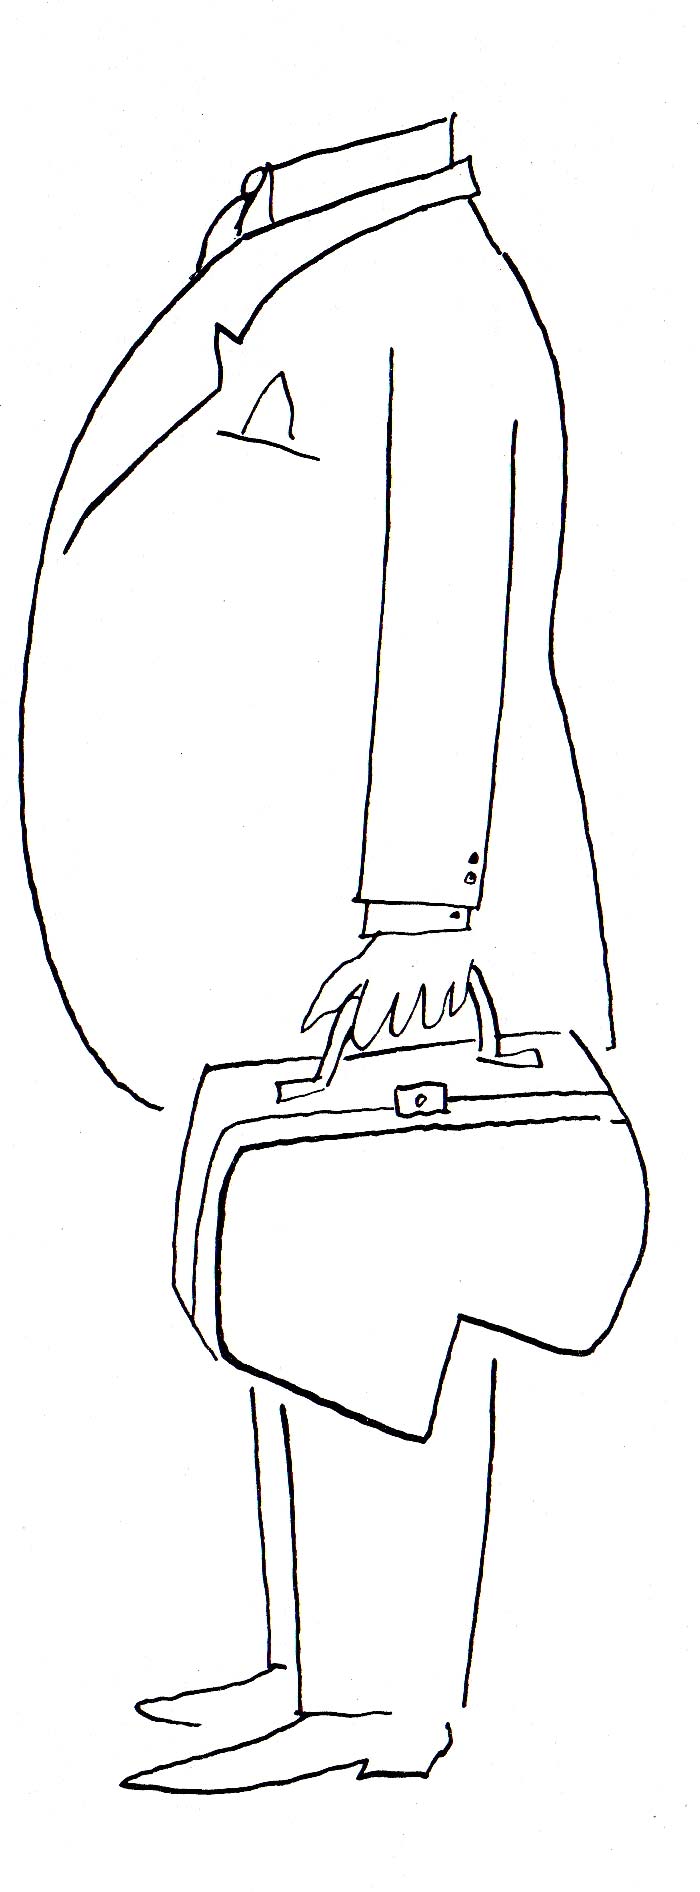 Drawing in <em>The New Yorker</em>, August 29, 1953.